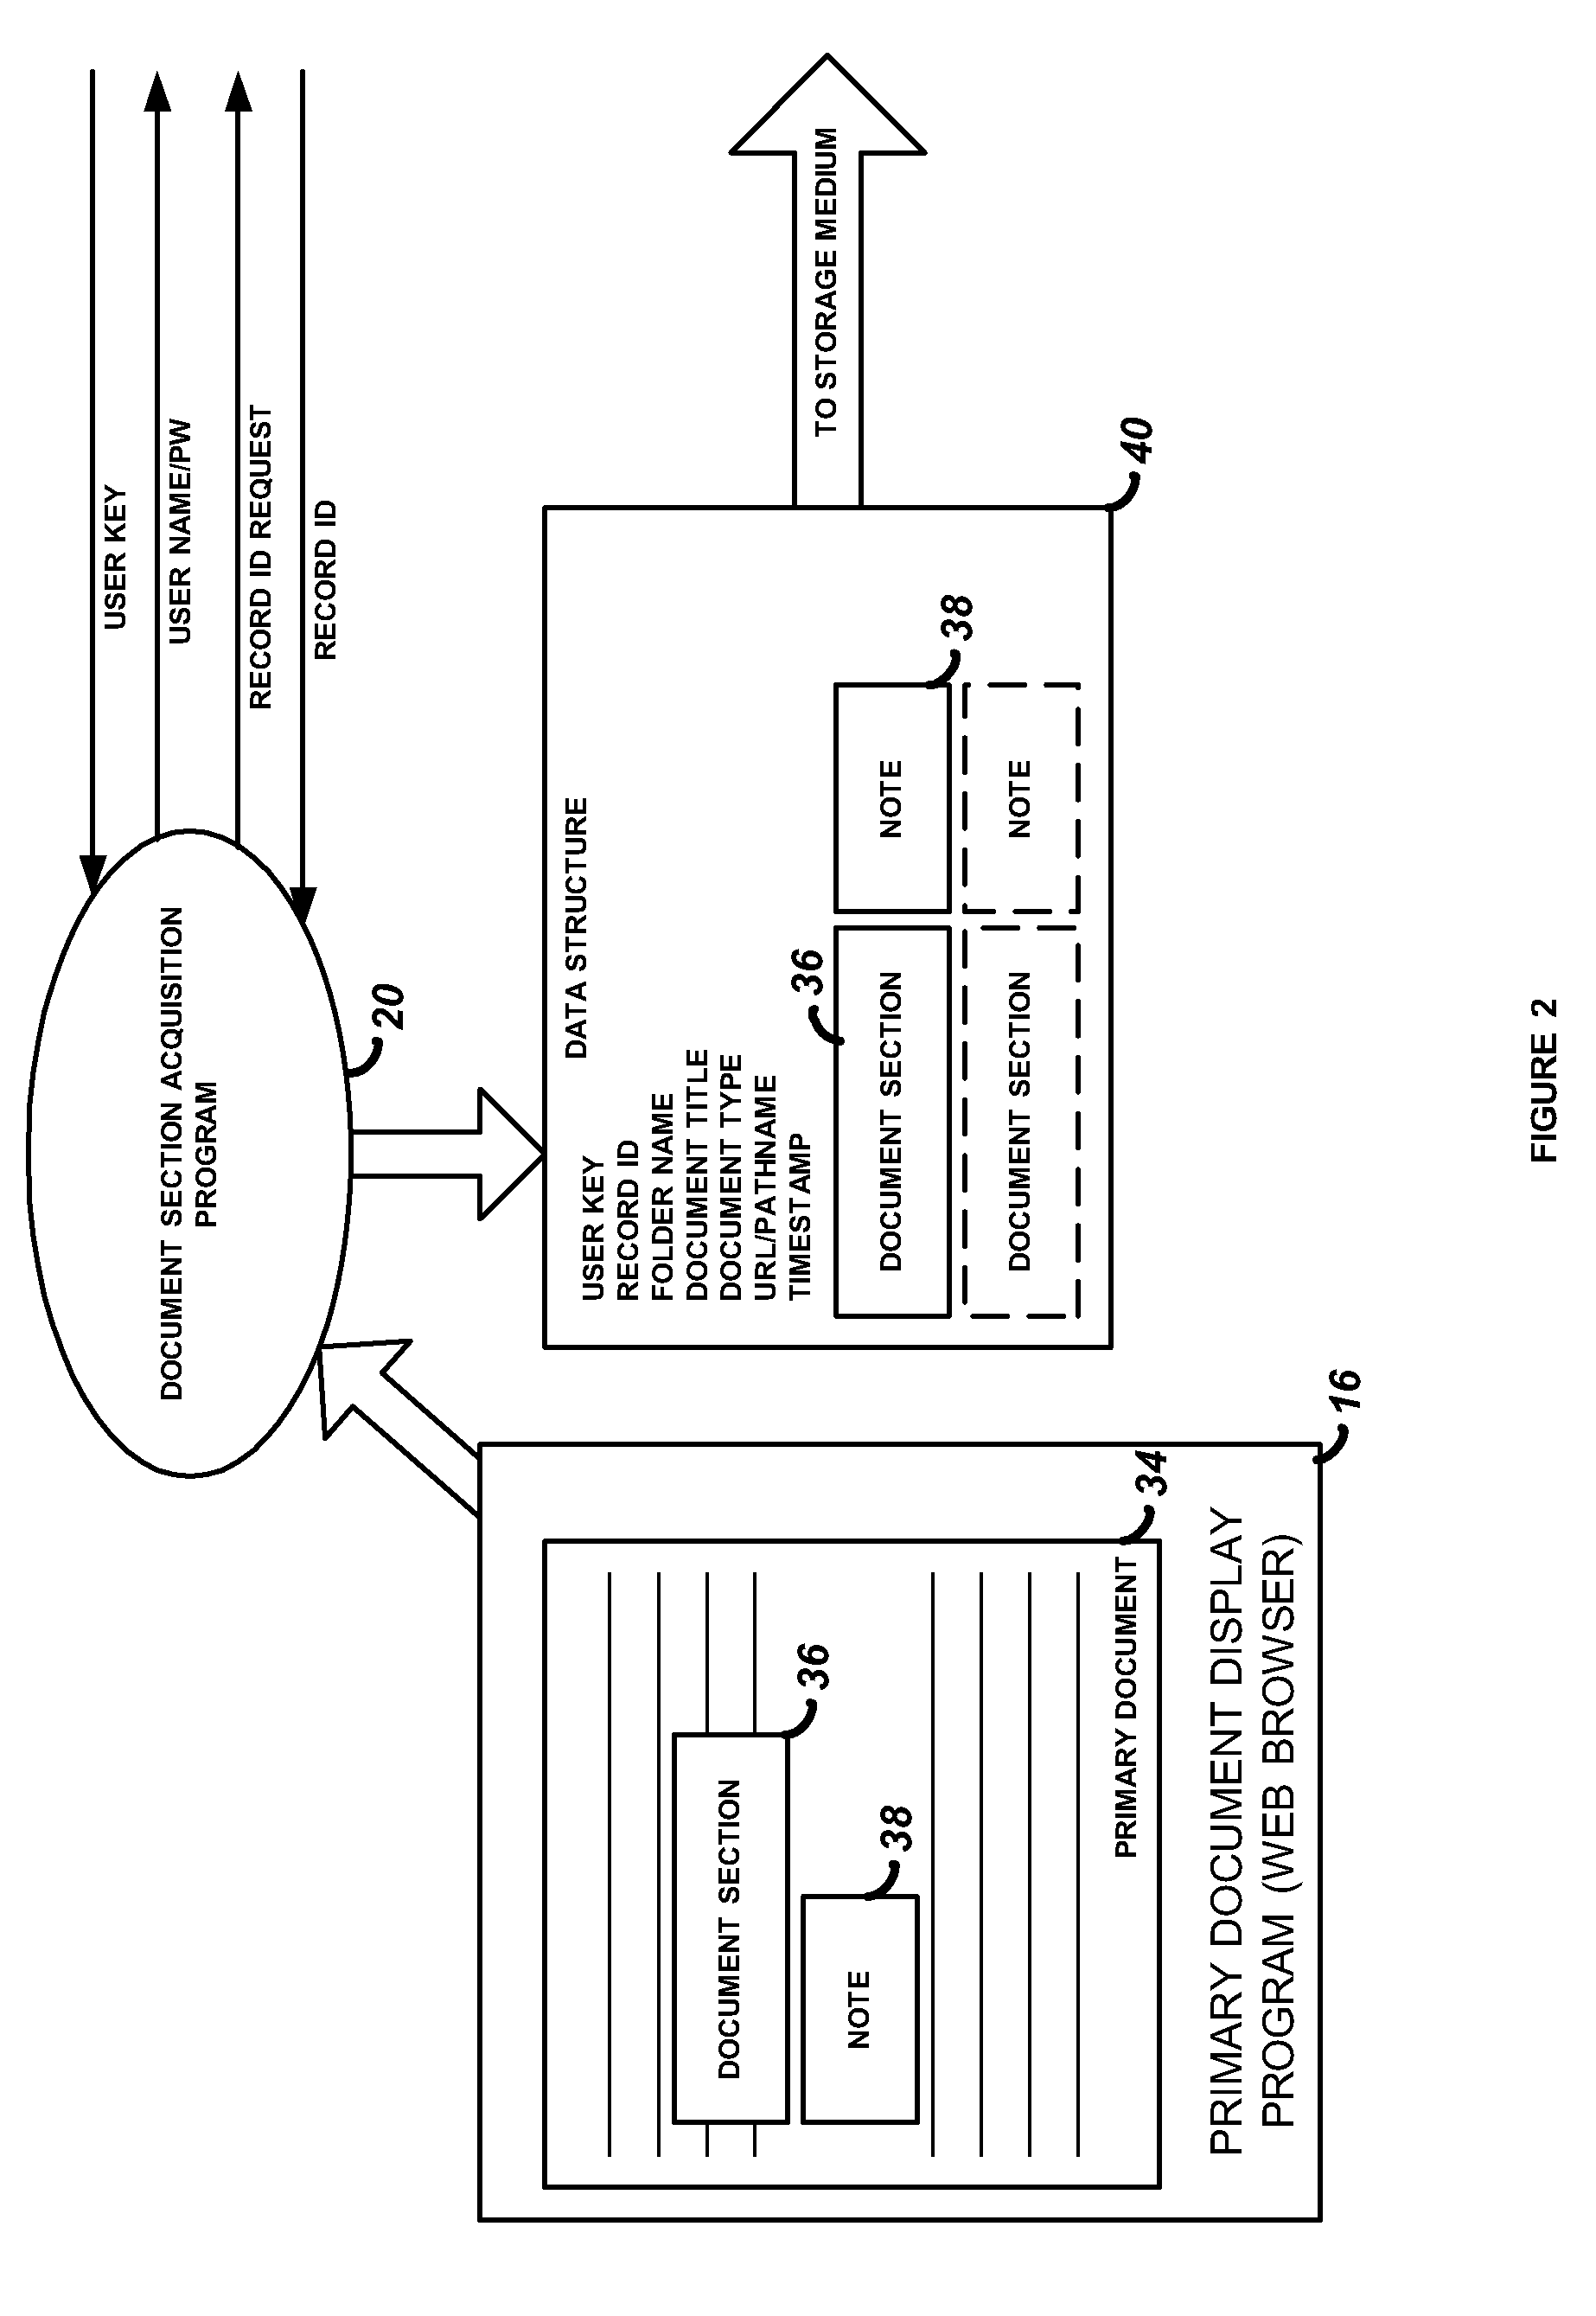 Method and apparatus for automatically storing and retrieving selected document sections and user-generated notes